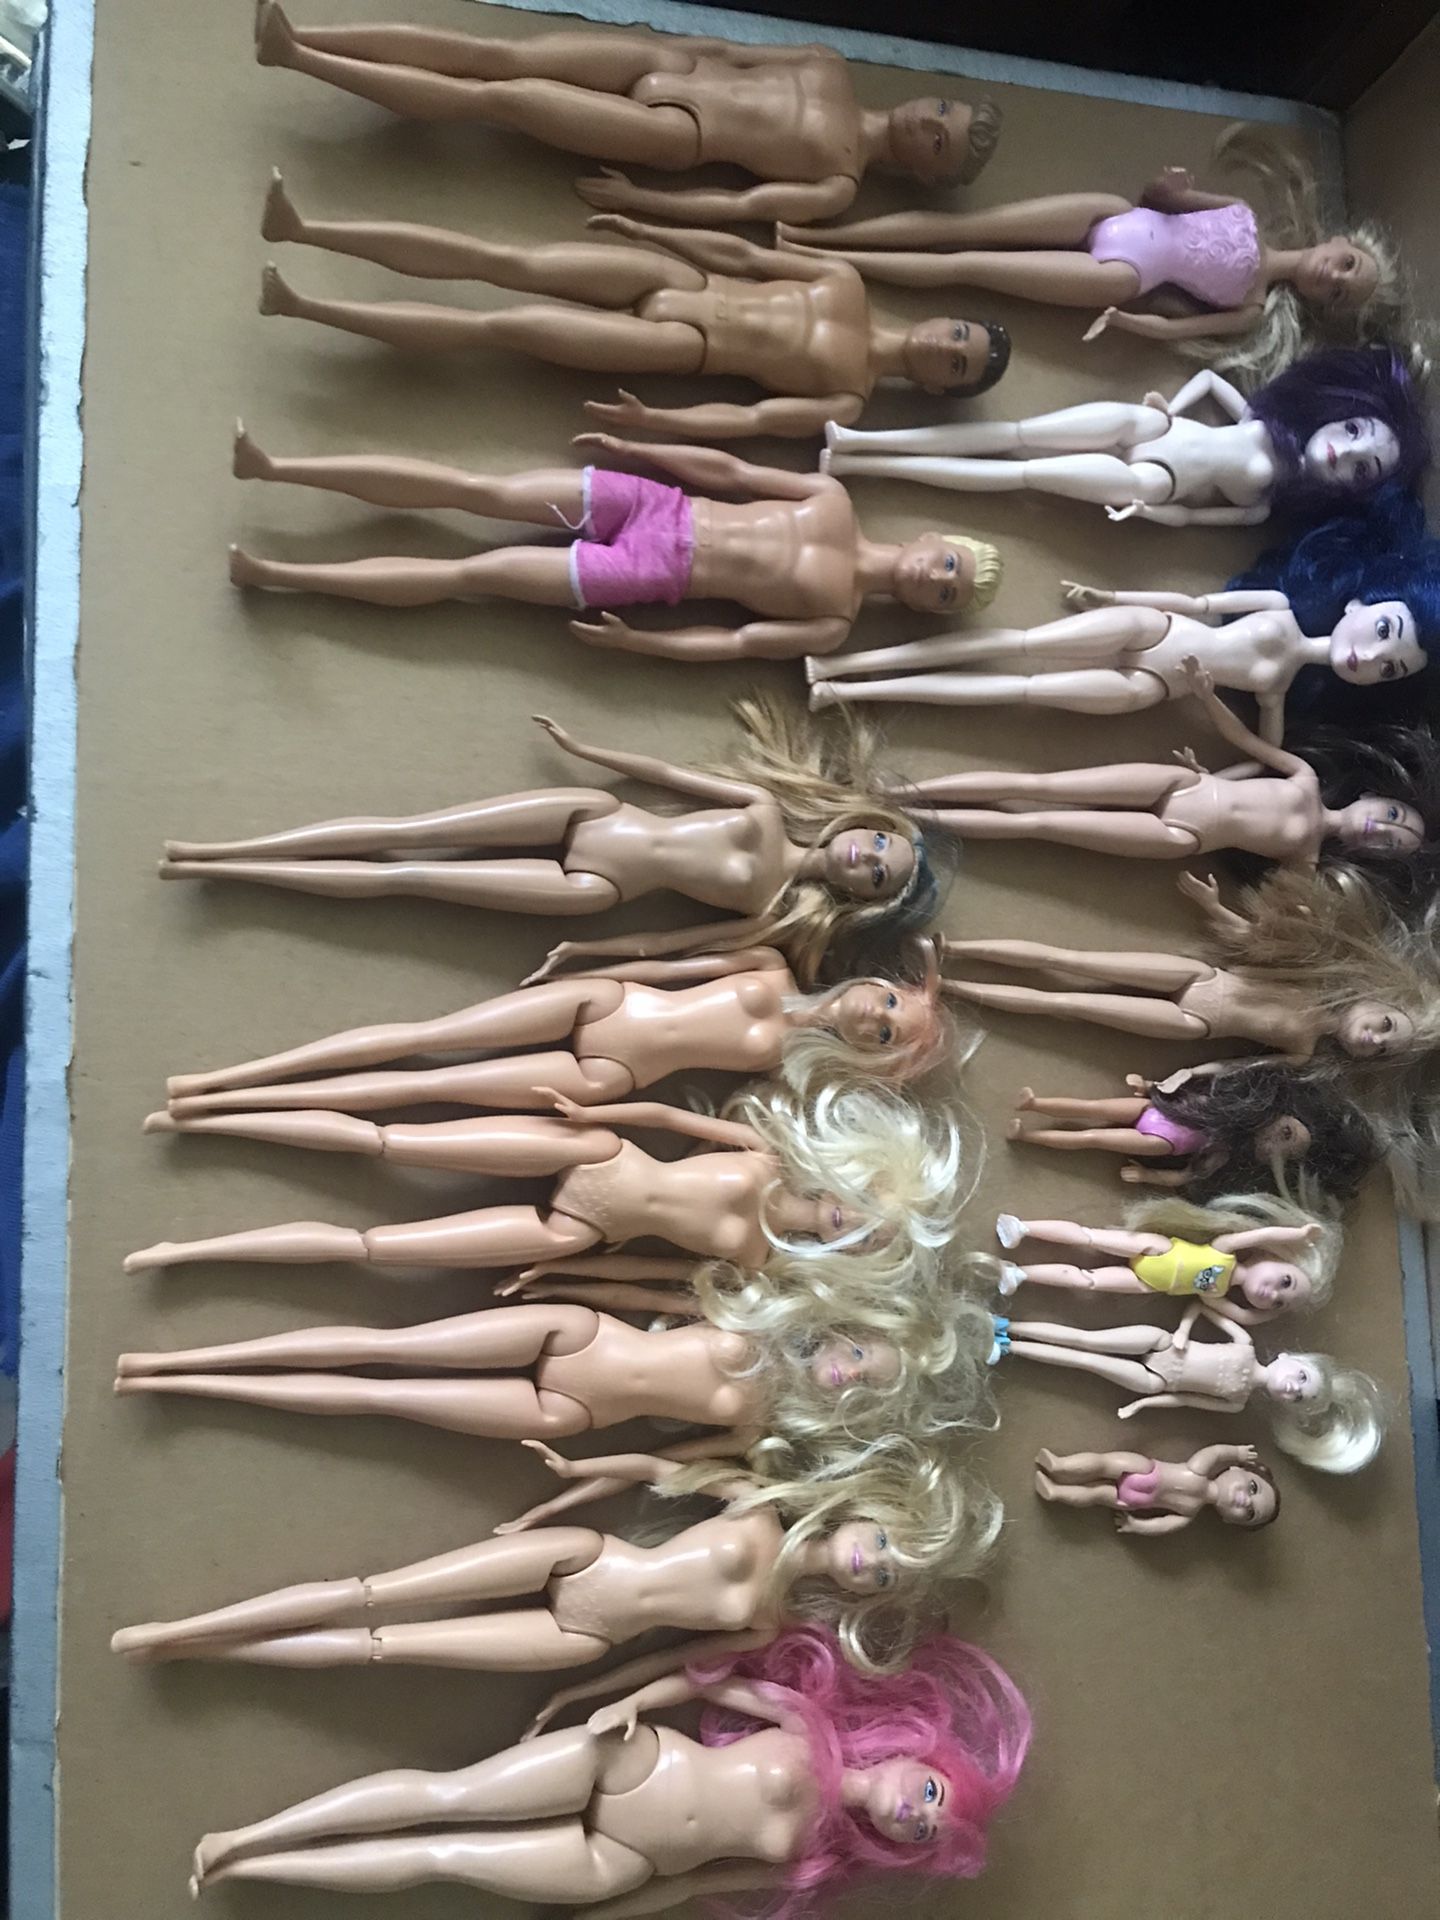 Barbie & Ken No Clothes Plus More(18 In All)